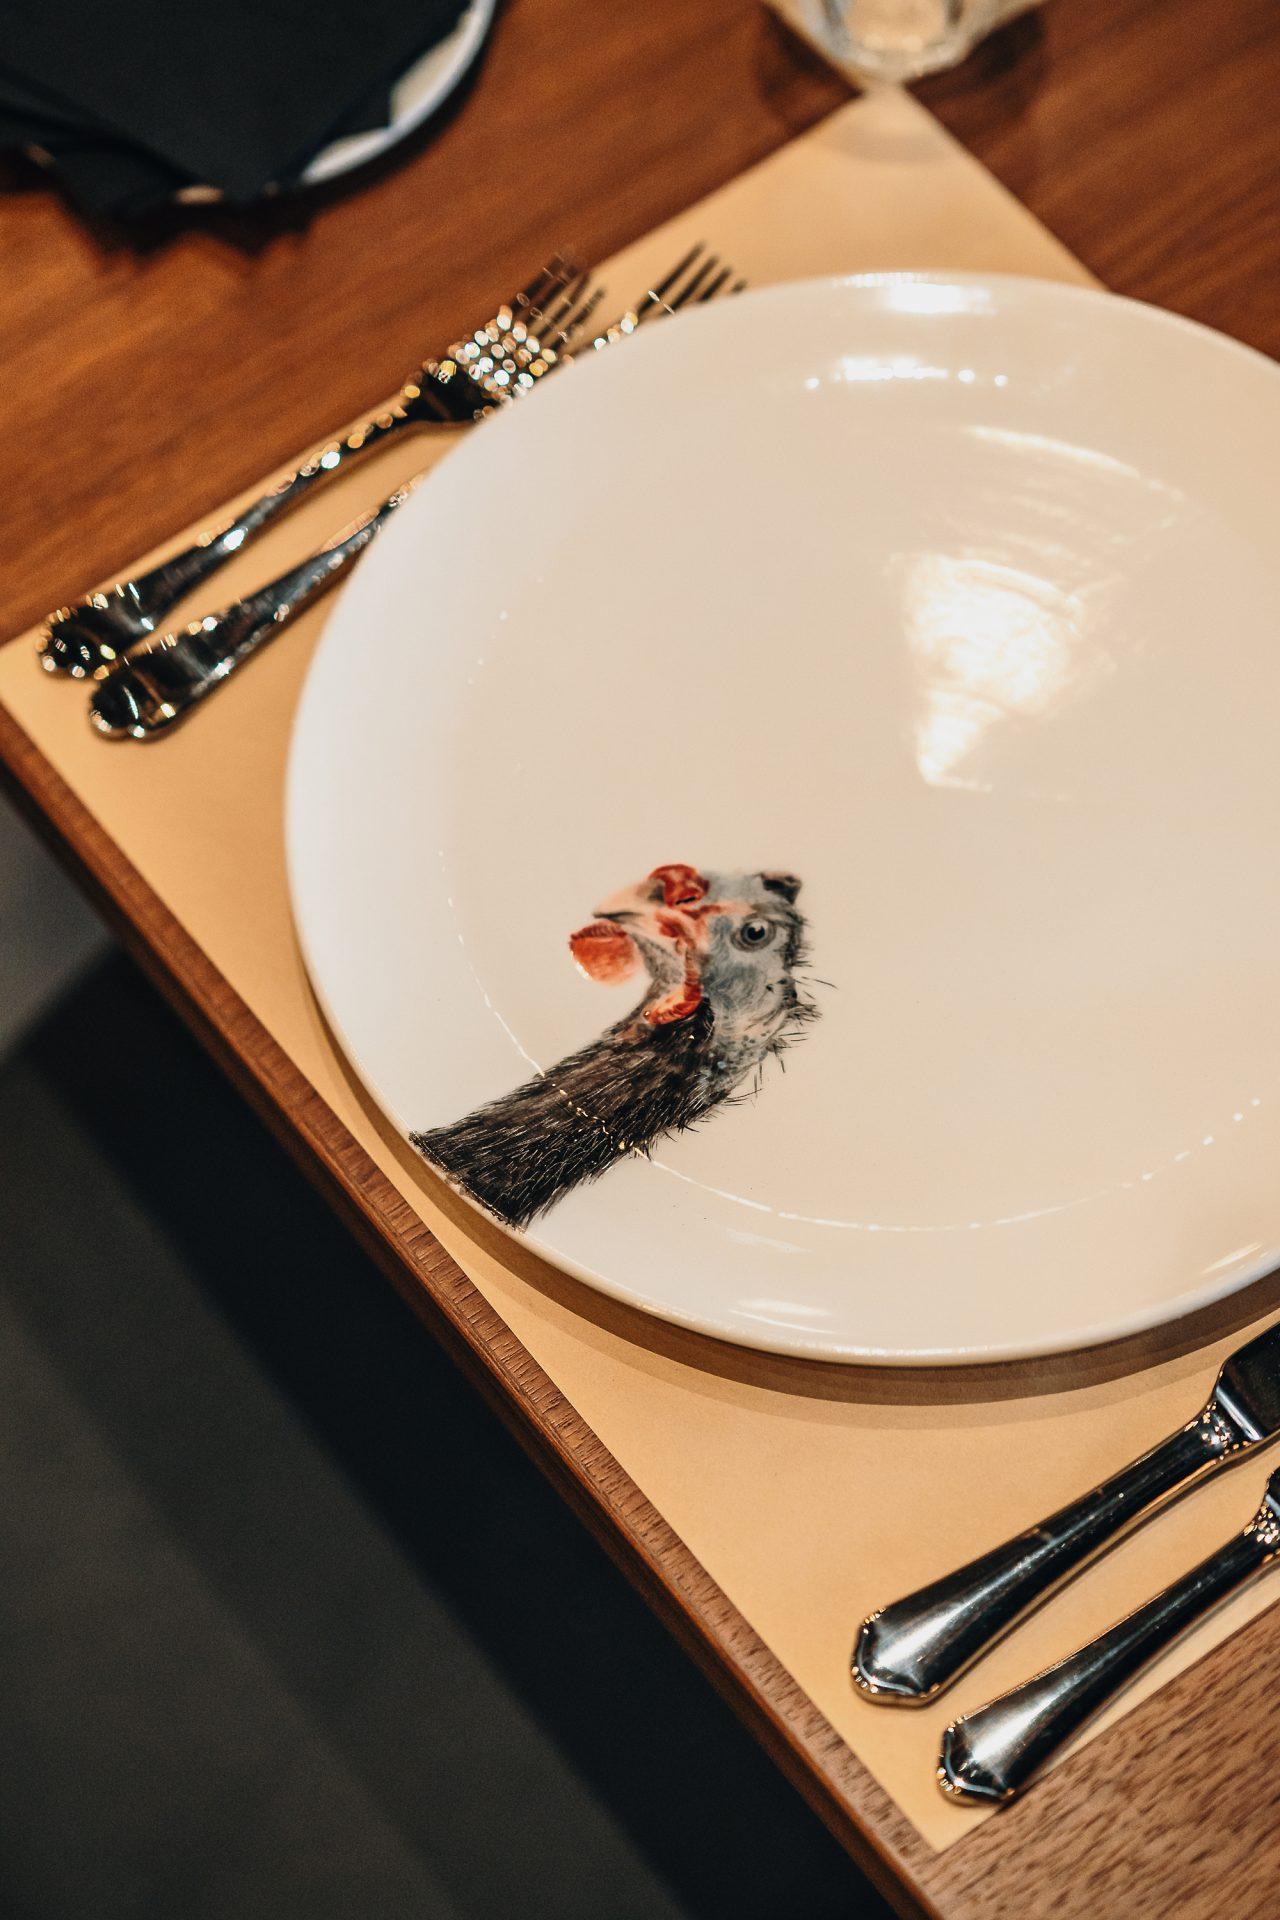 Rooster Dining Plate and Spoons on Table at CHI SPACCA Restaurant, a Fancy Dining Restaurant in Riyadh - Cool Inc